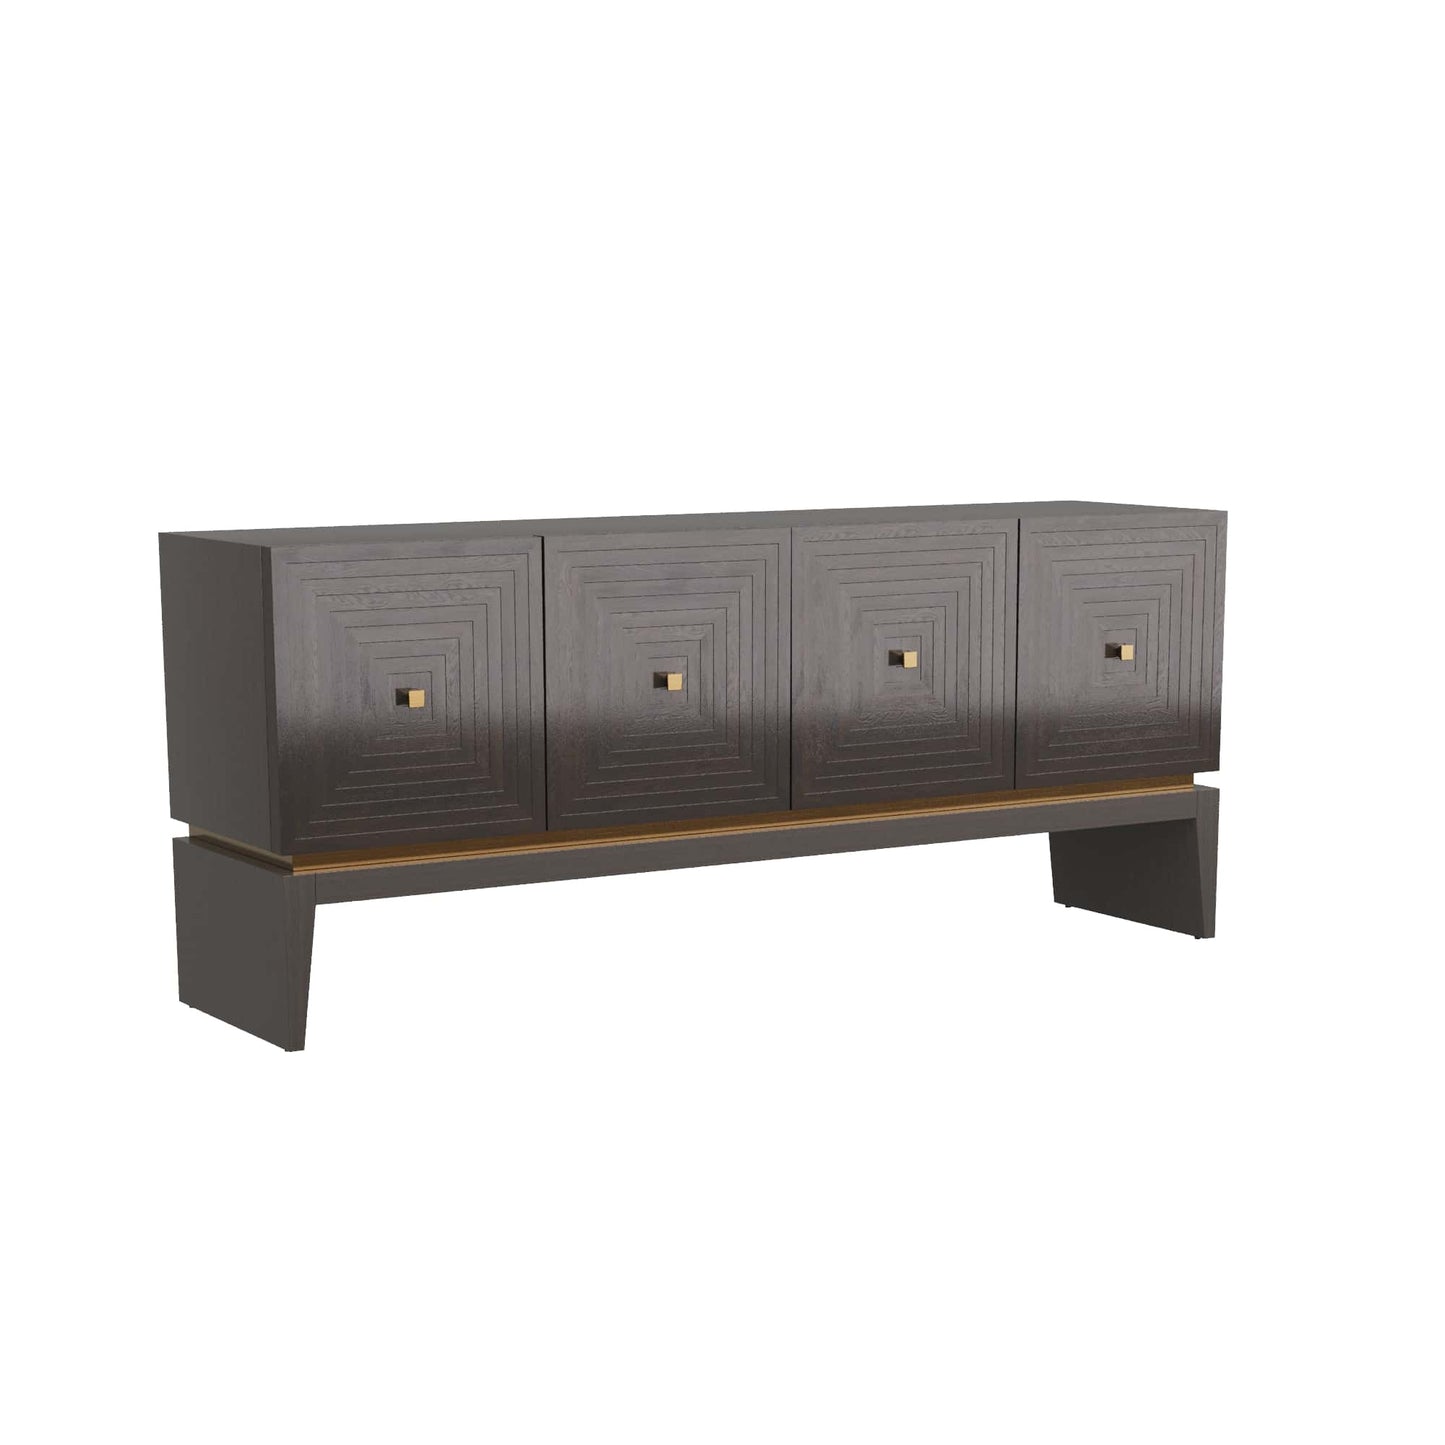 Renata Credenza - Sable-Finished Oak with Stepped Door Fronts and Antique Brass Hardware